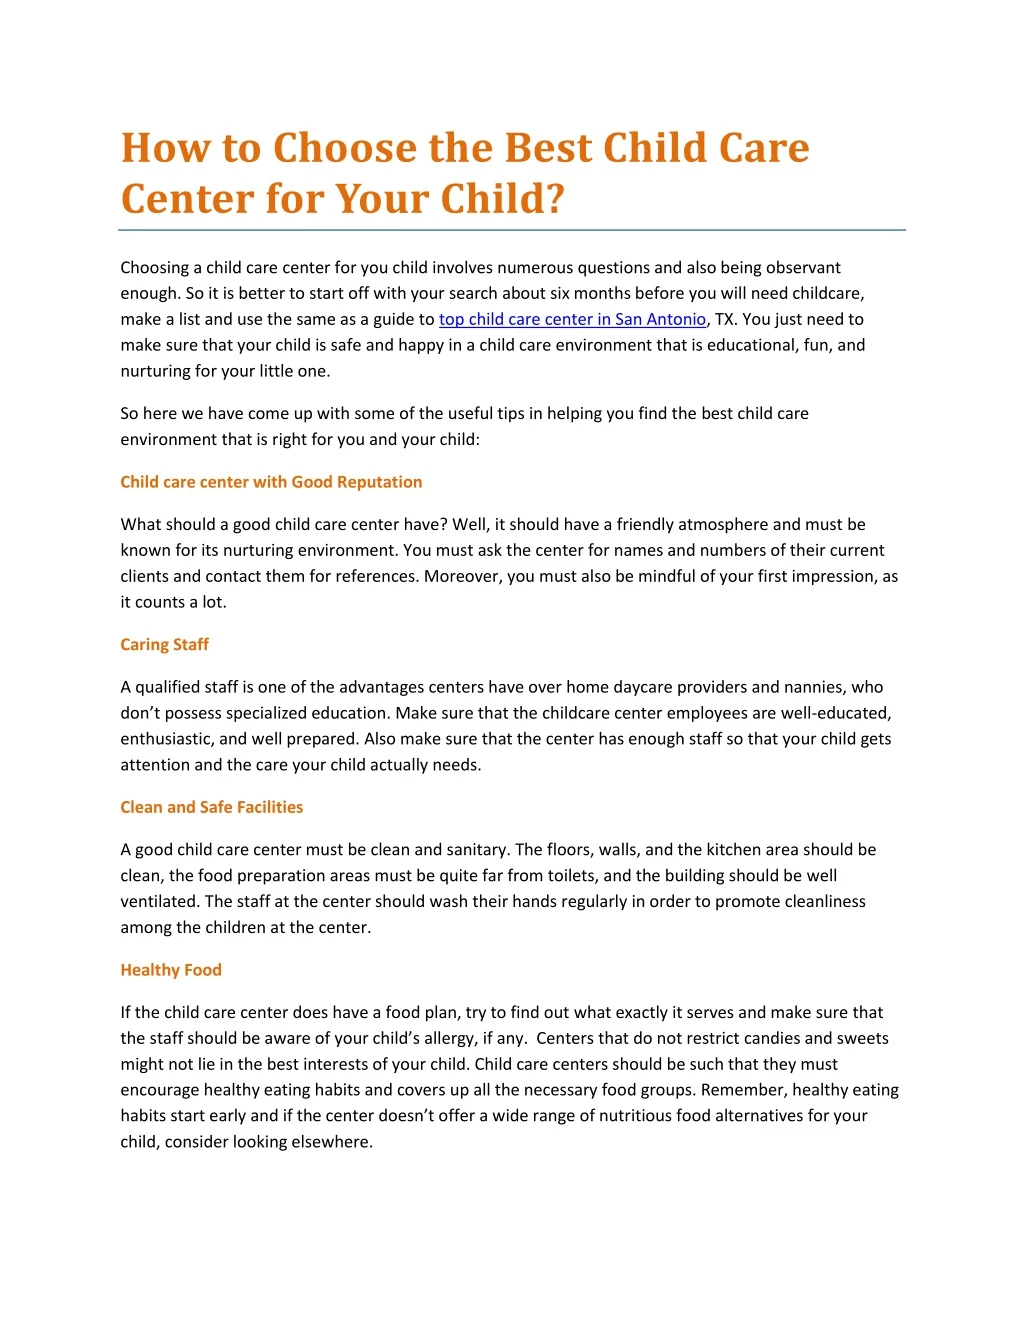 how to choose the best child care center for your